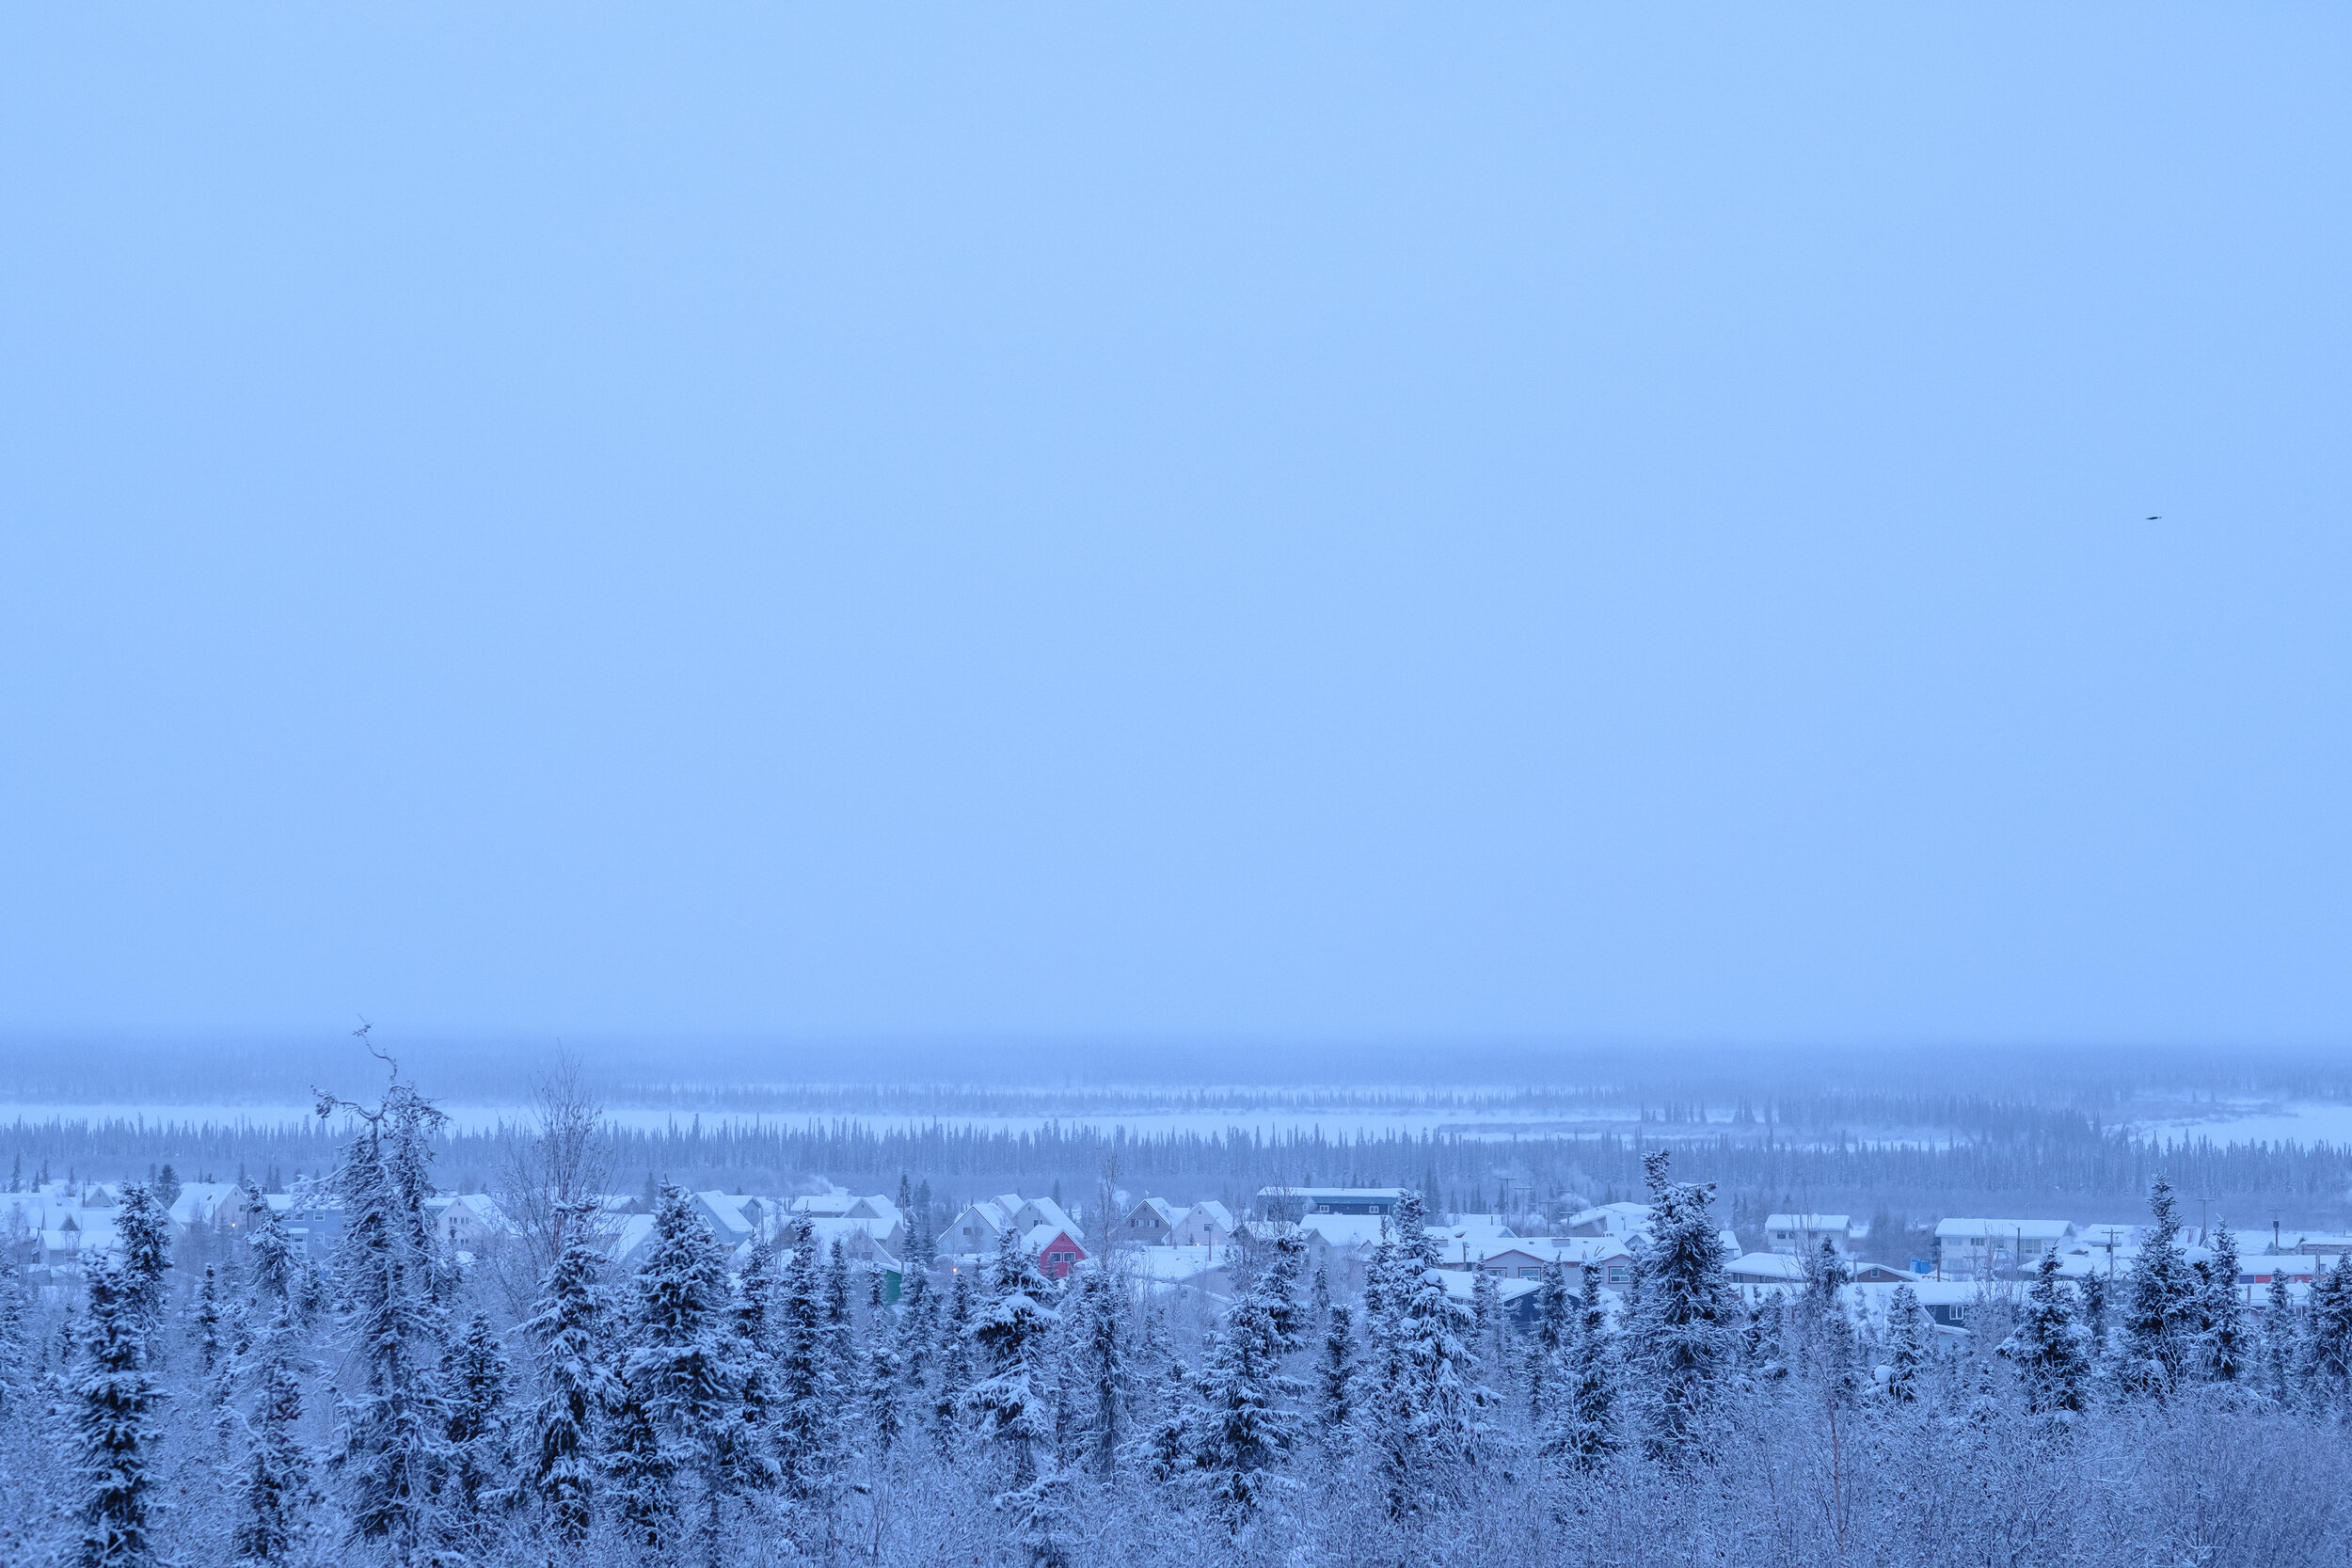  Photo Credit: Town of Inuvik 